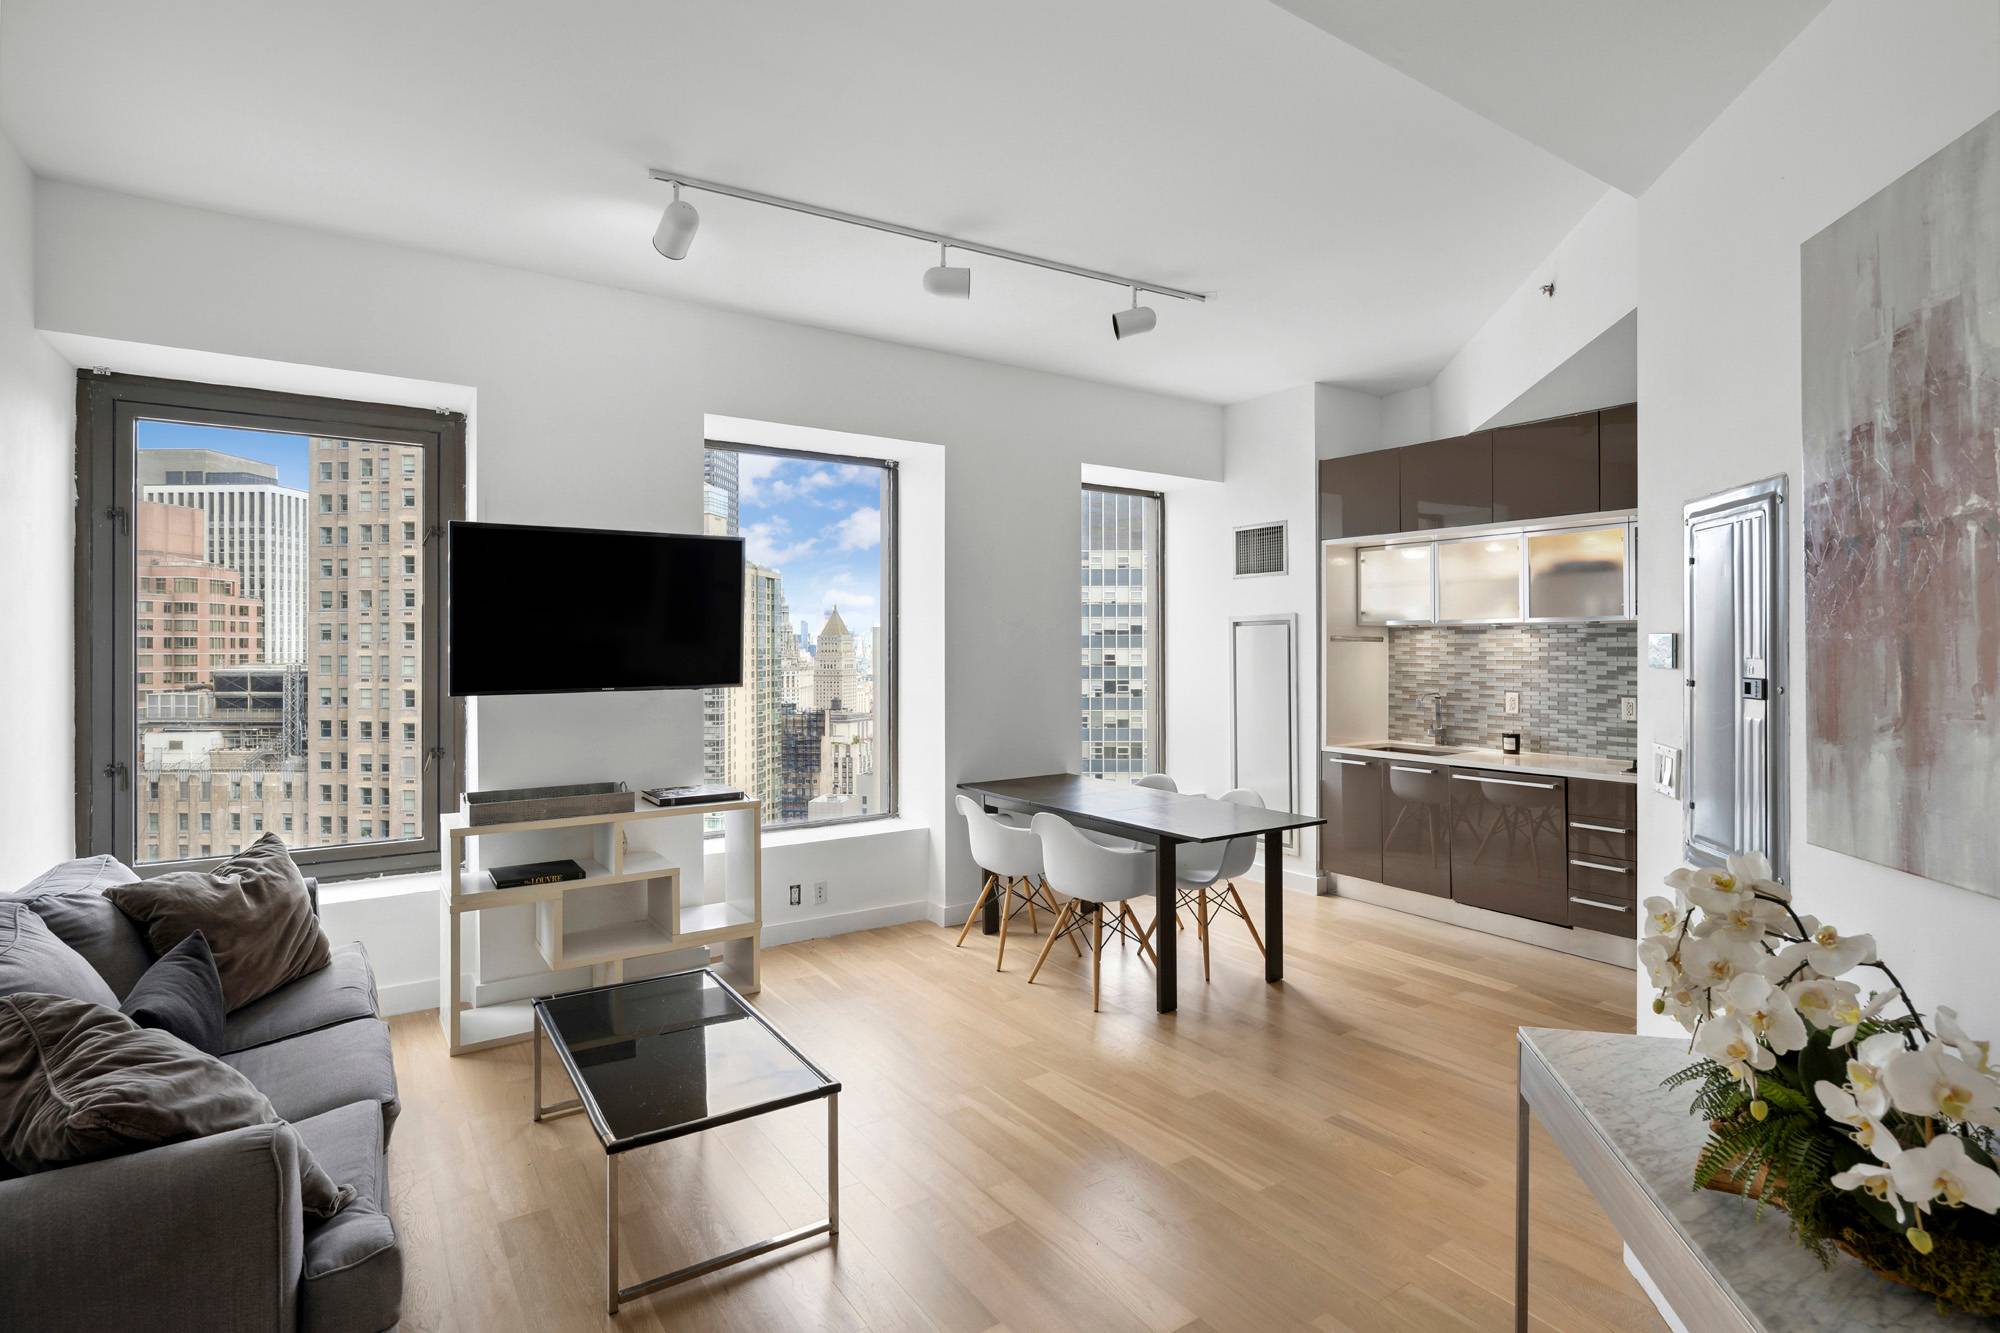 STUNNING HIGH FLOOR 2 BD 2 BA CORNER UNIT W/ CITY AND WATER VIEW IN HEART OF FIDI